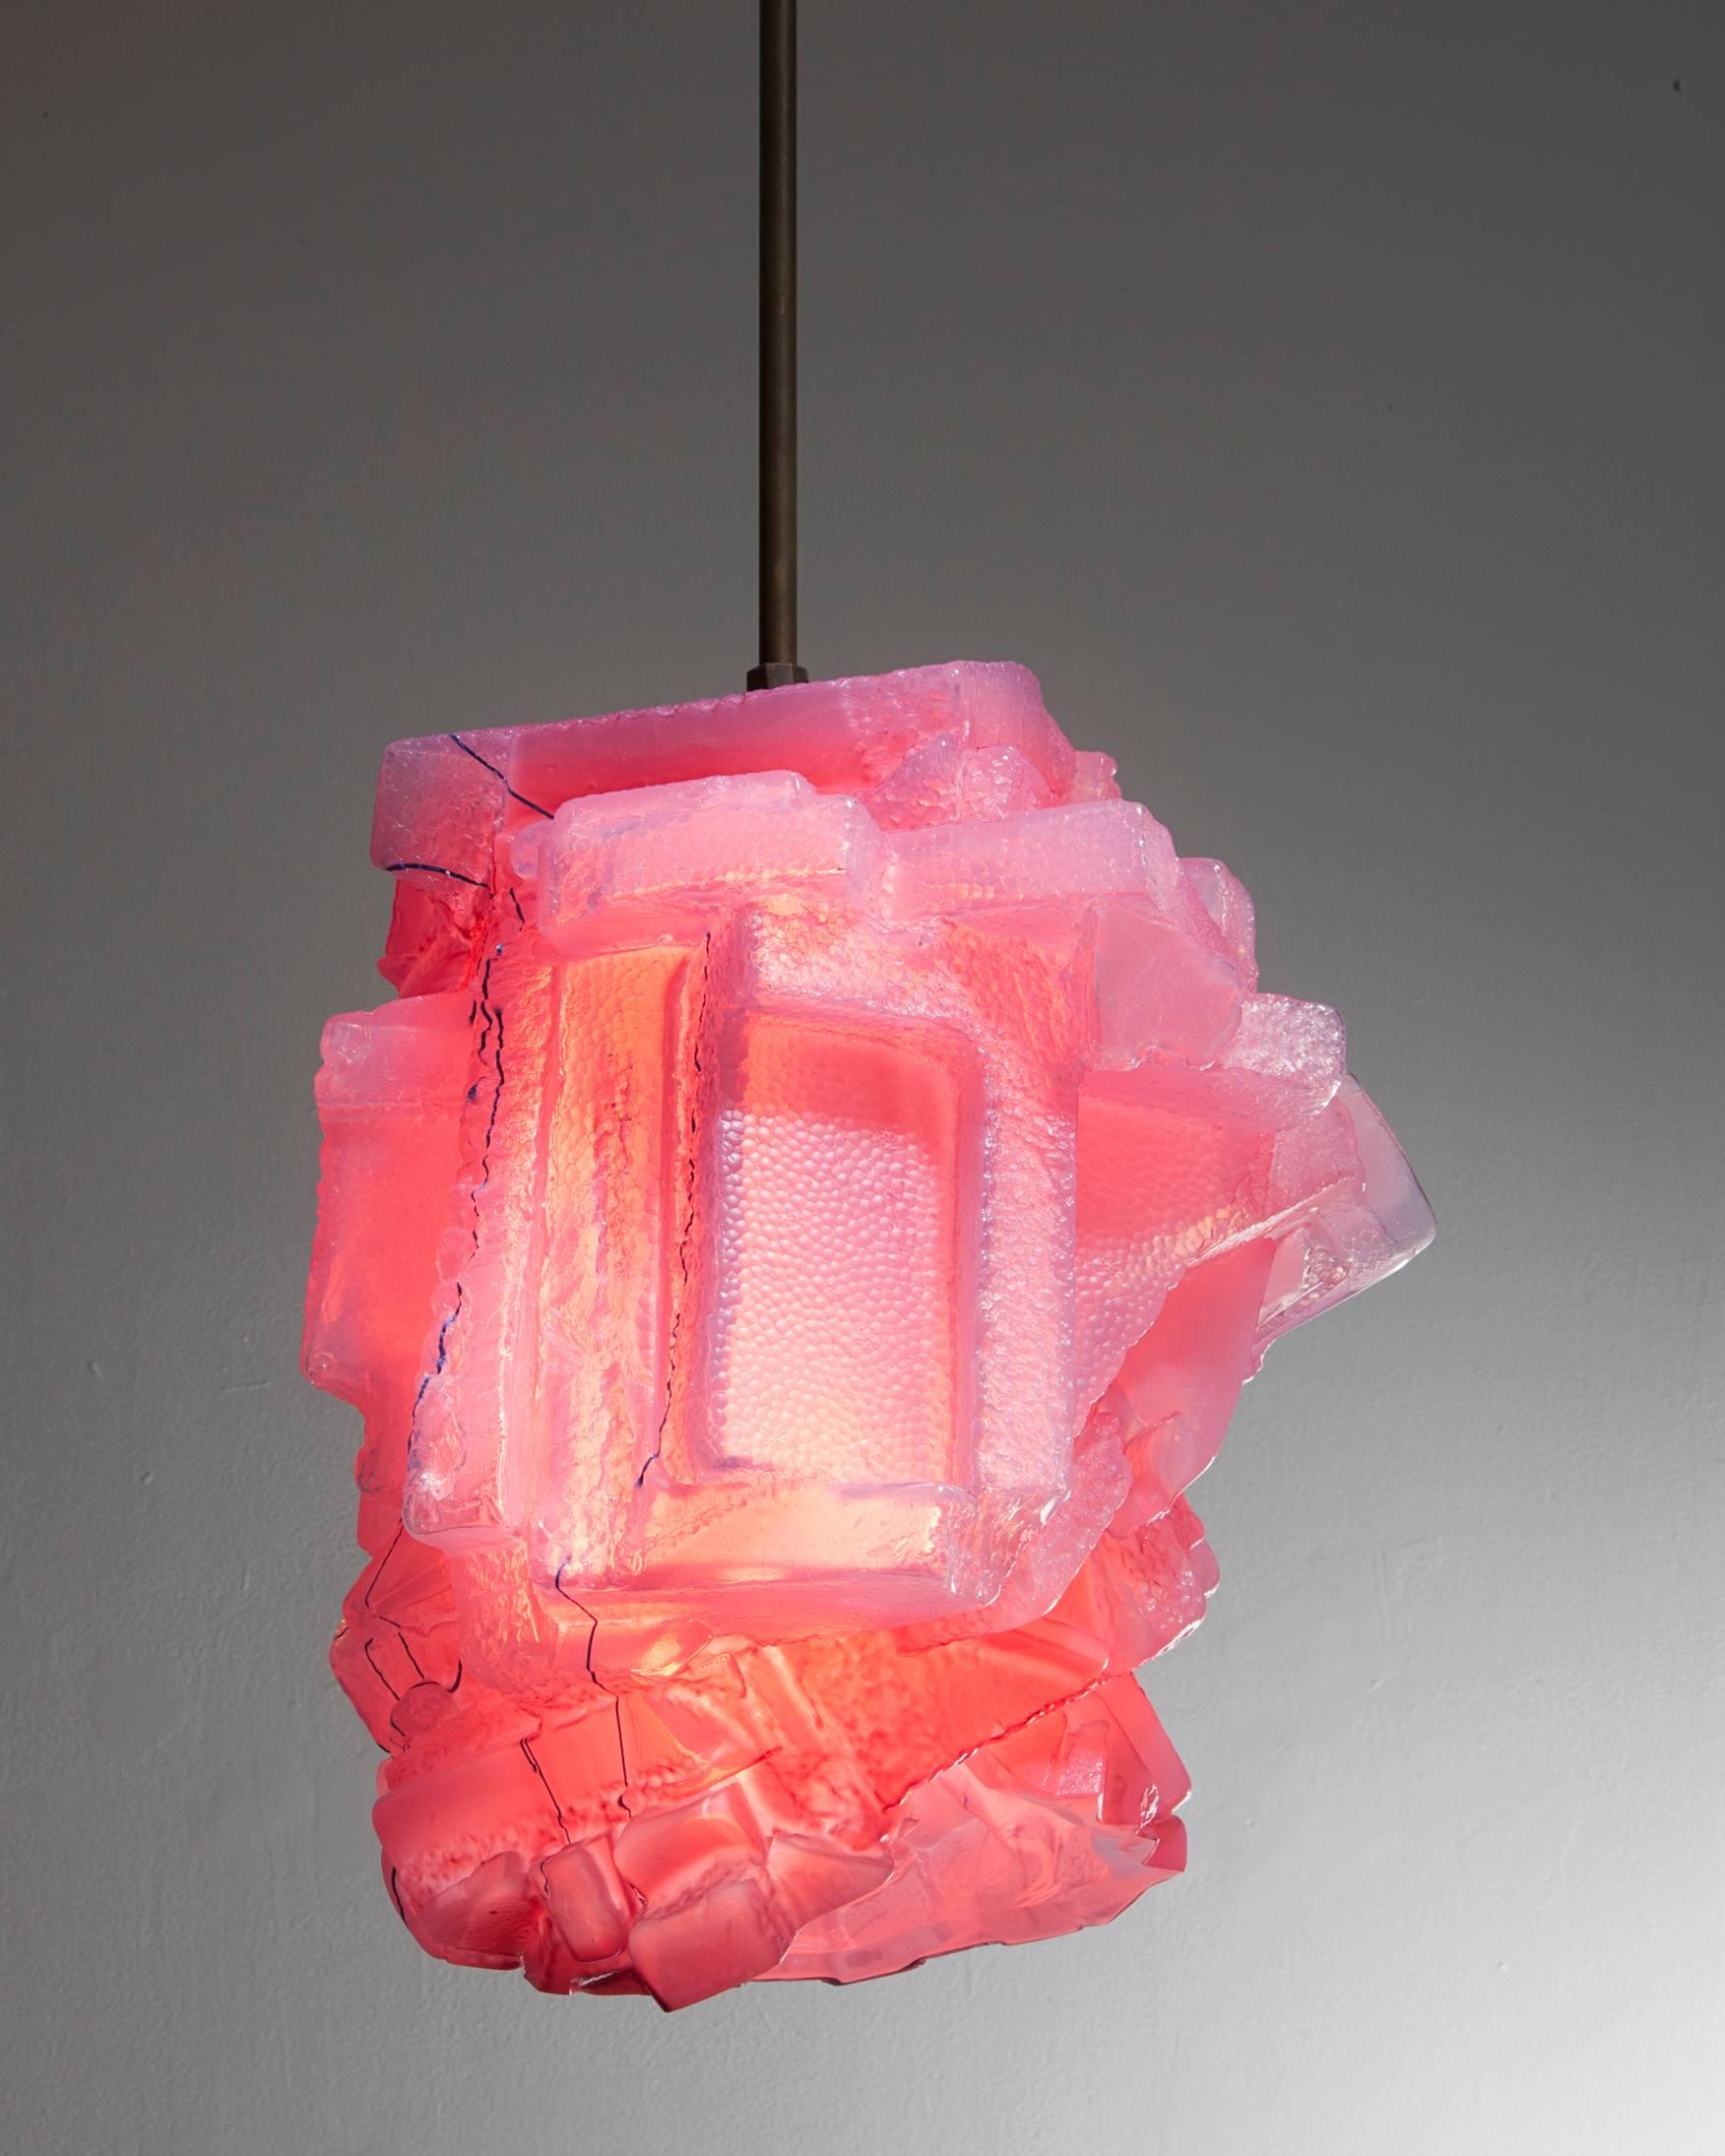 American Unique Assemblage Pendant Lamp in Handblown Glass by Thaddeus Wolfe, 2015